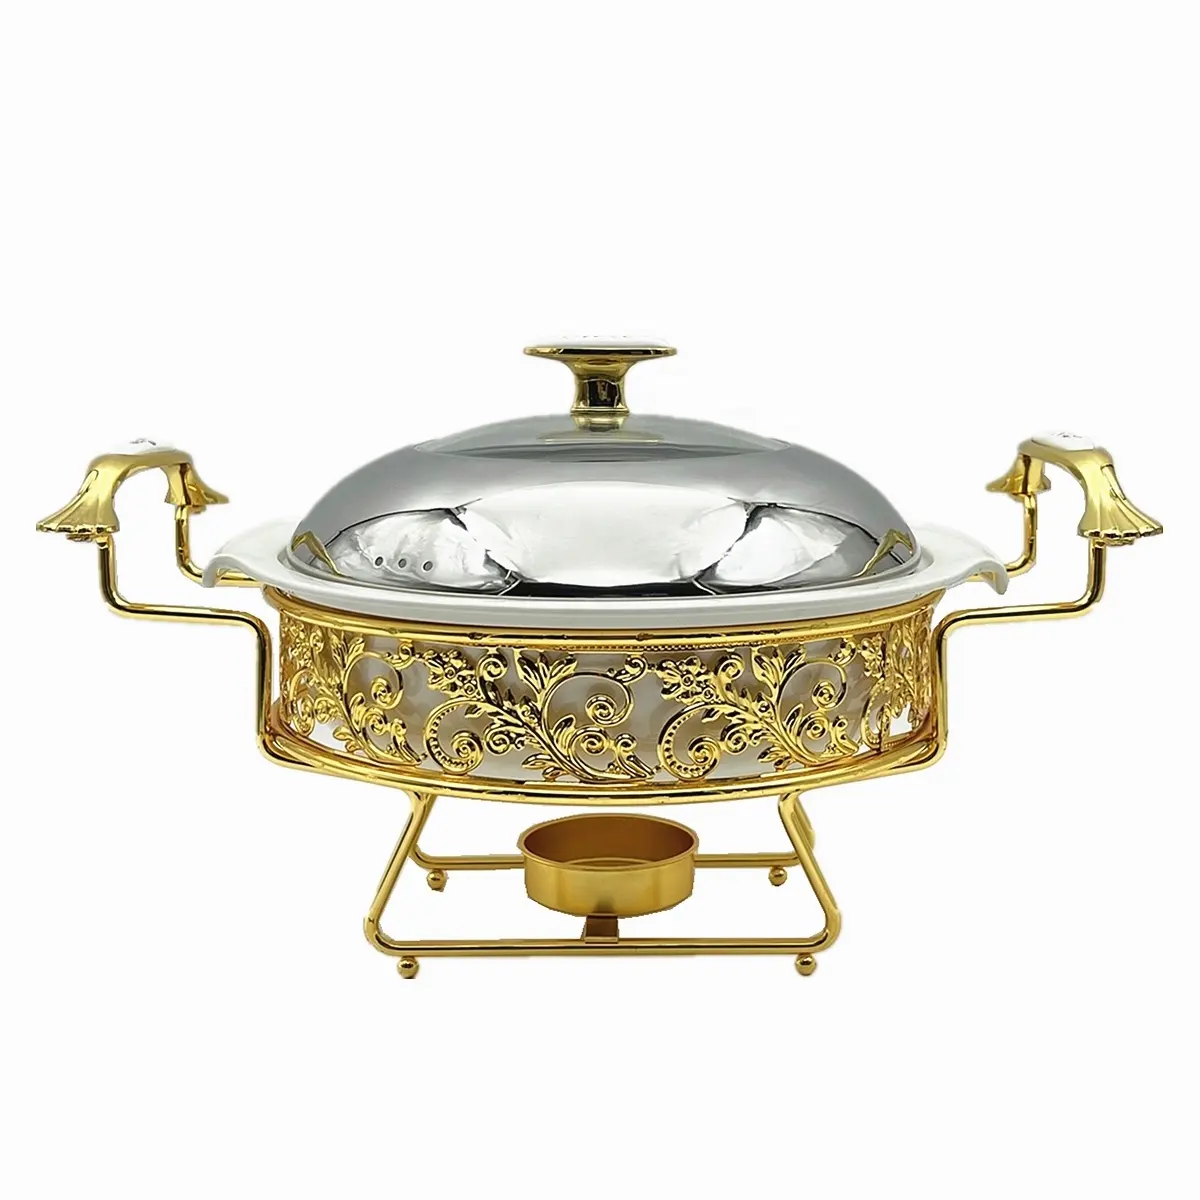 High Quality Gold Ceramic Food Warmer Set 11Inches Buffet Chafing Dishes For Catering For Restaurant Wedding Party